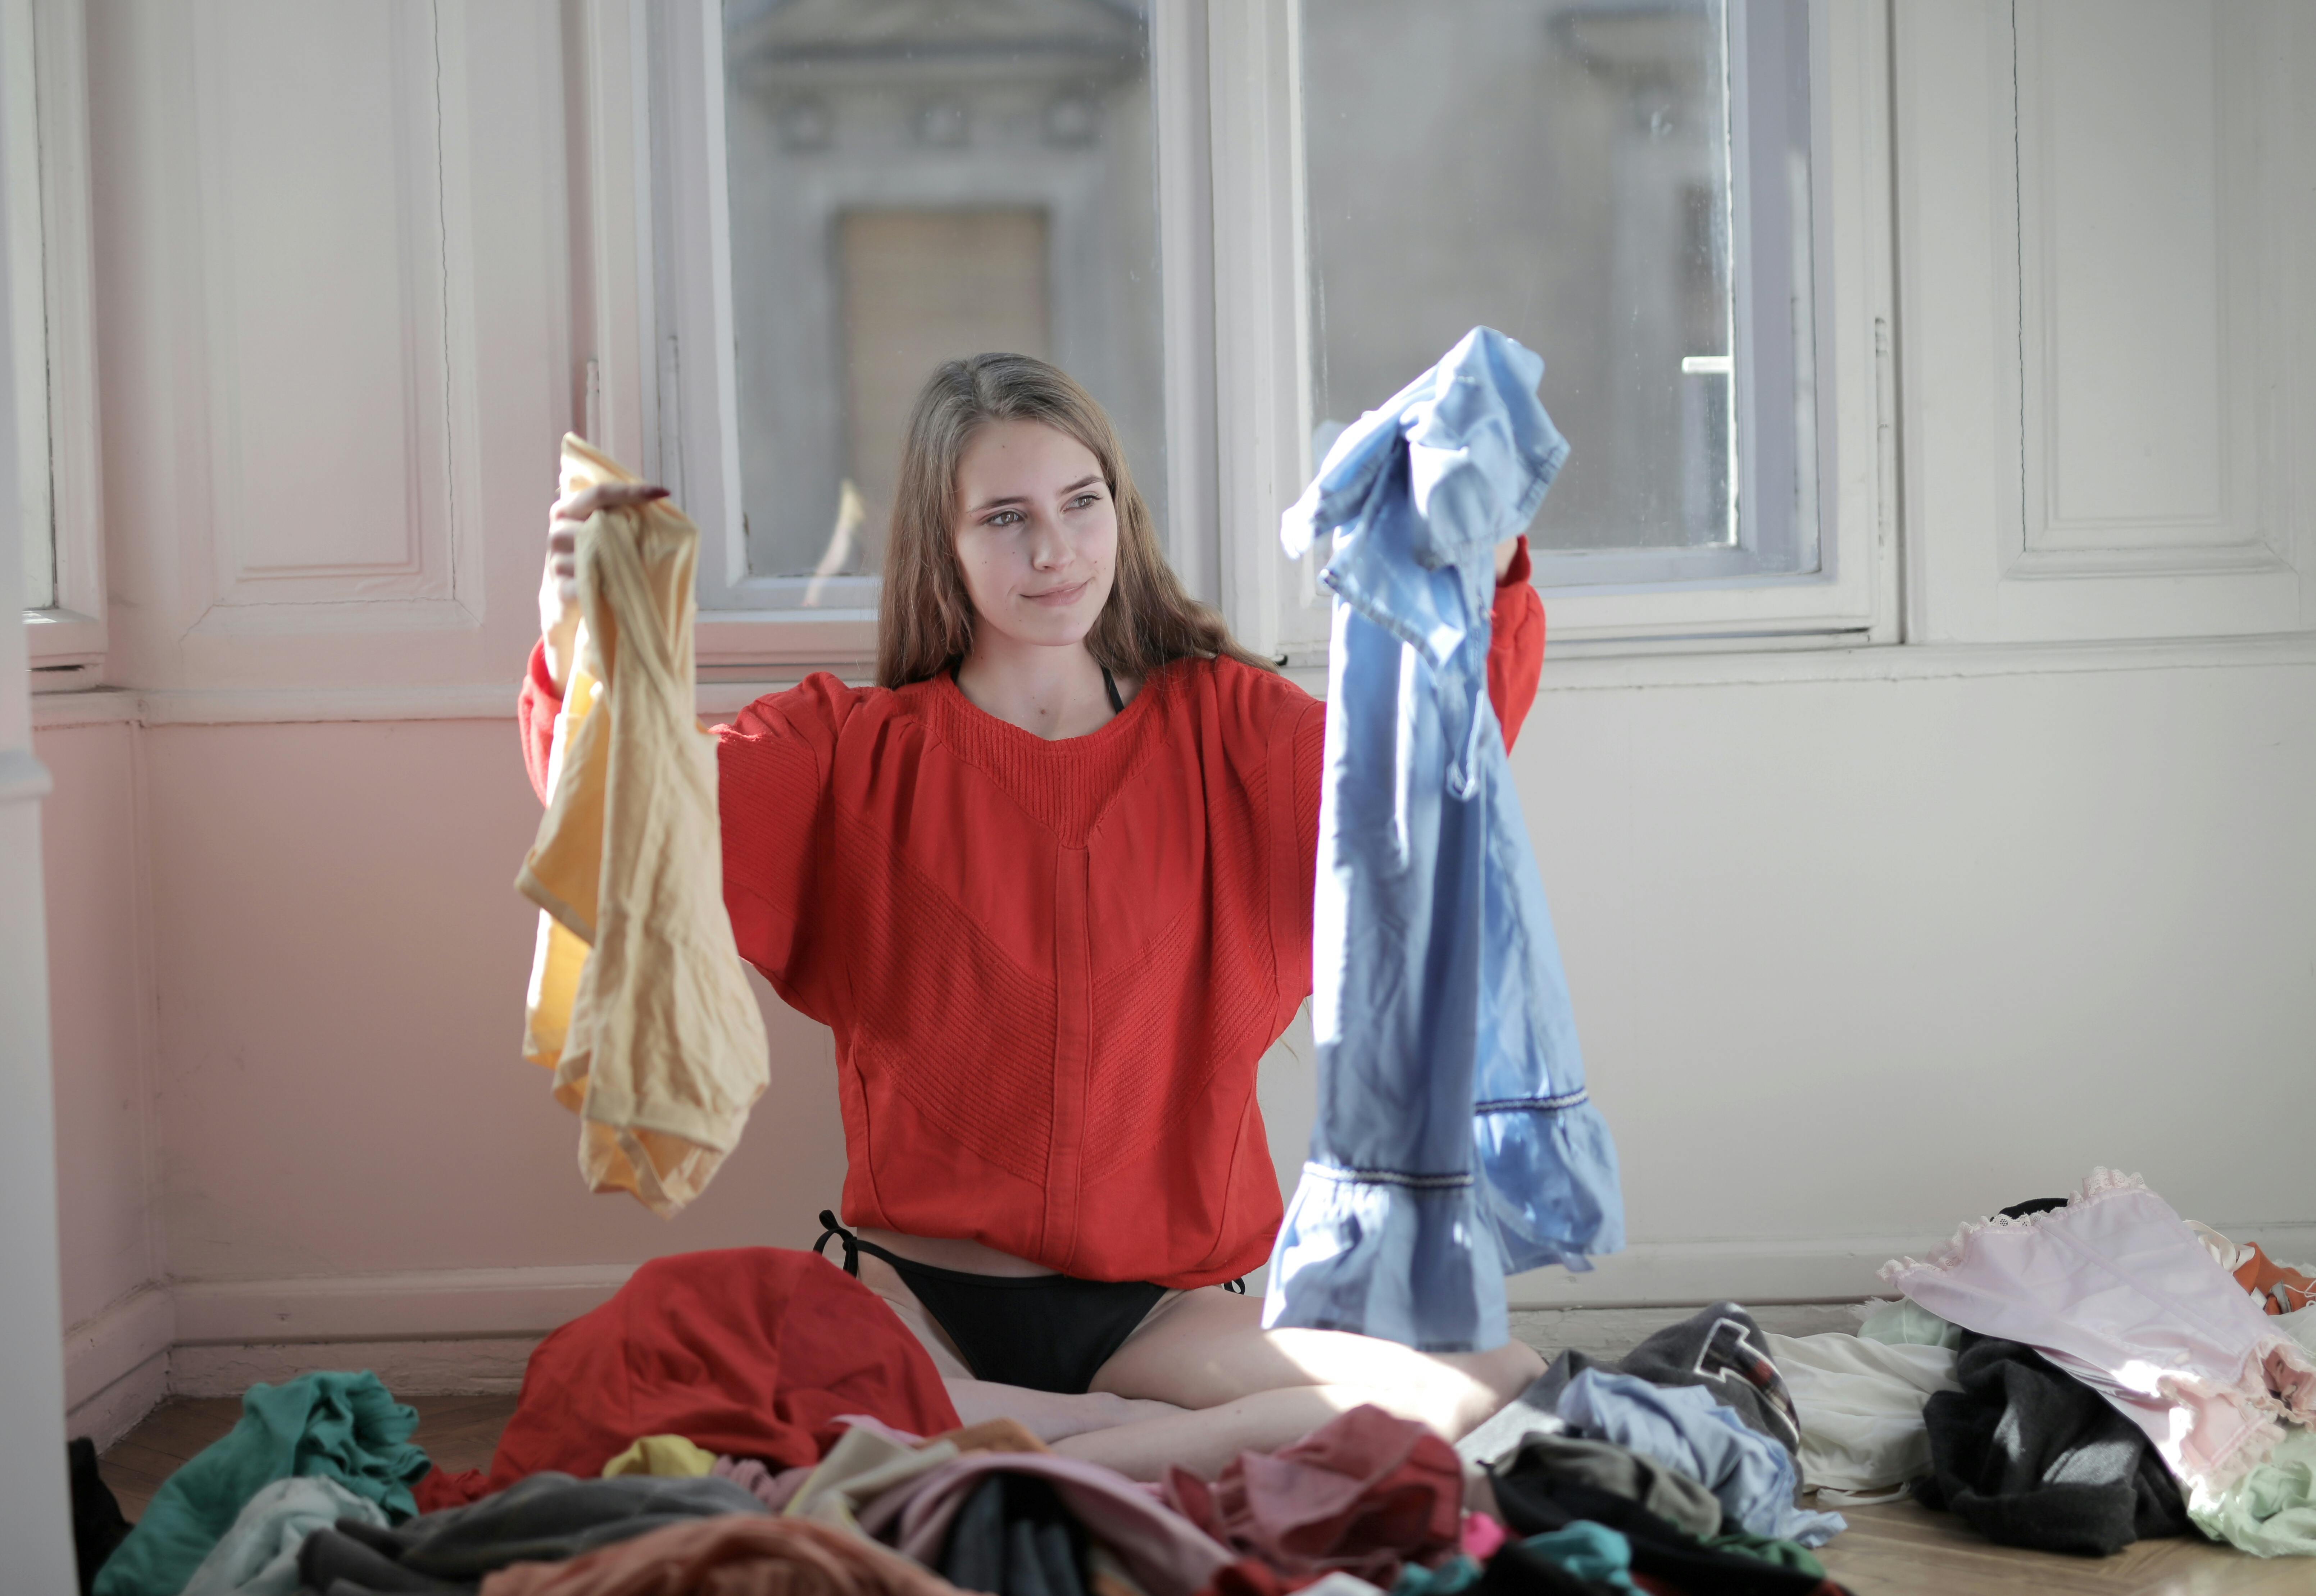 Woman holding up pieces of clothing from the laundry | Source: Pexels